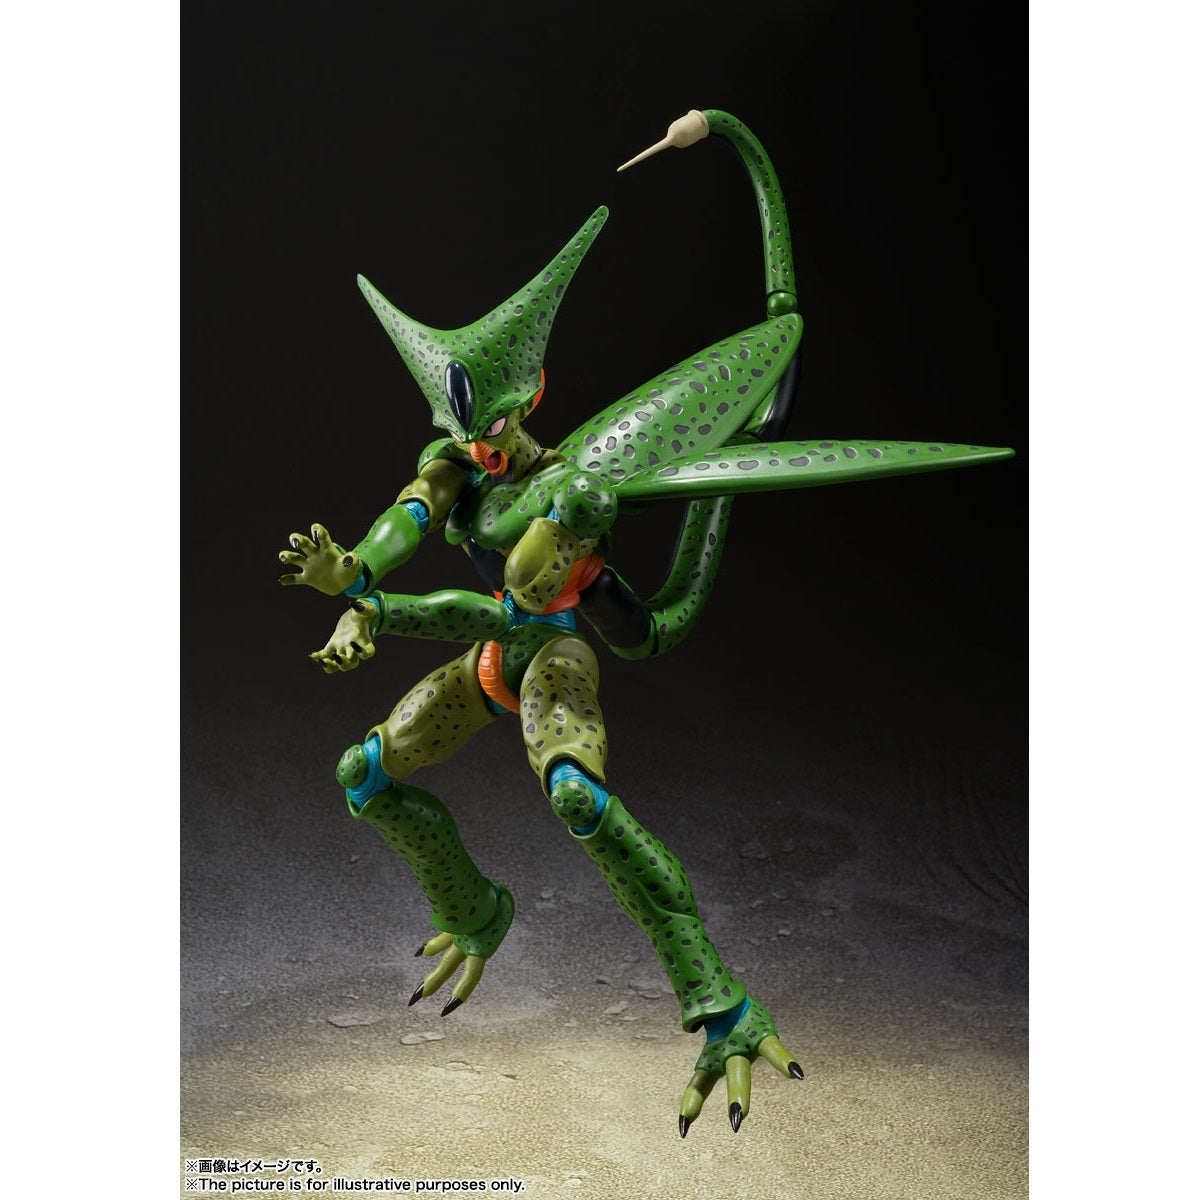 Dragon Ball Z S.H.Figuarts "Cell" (First Form)-Bandai-Ace Cards & Collectibles